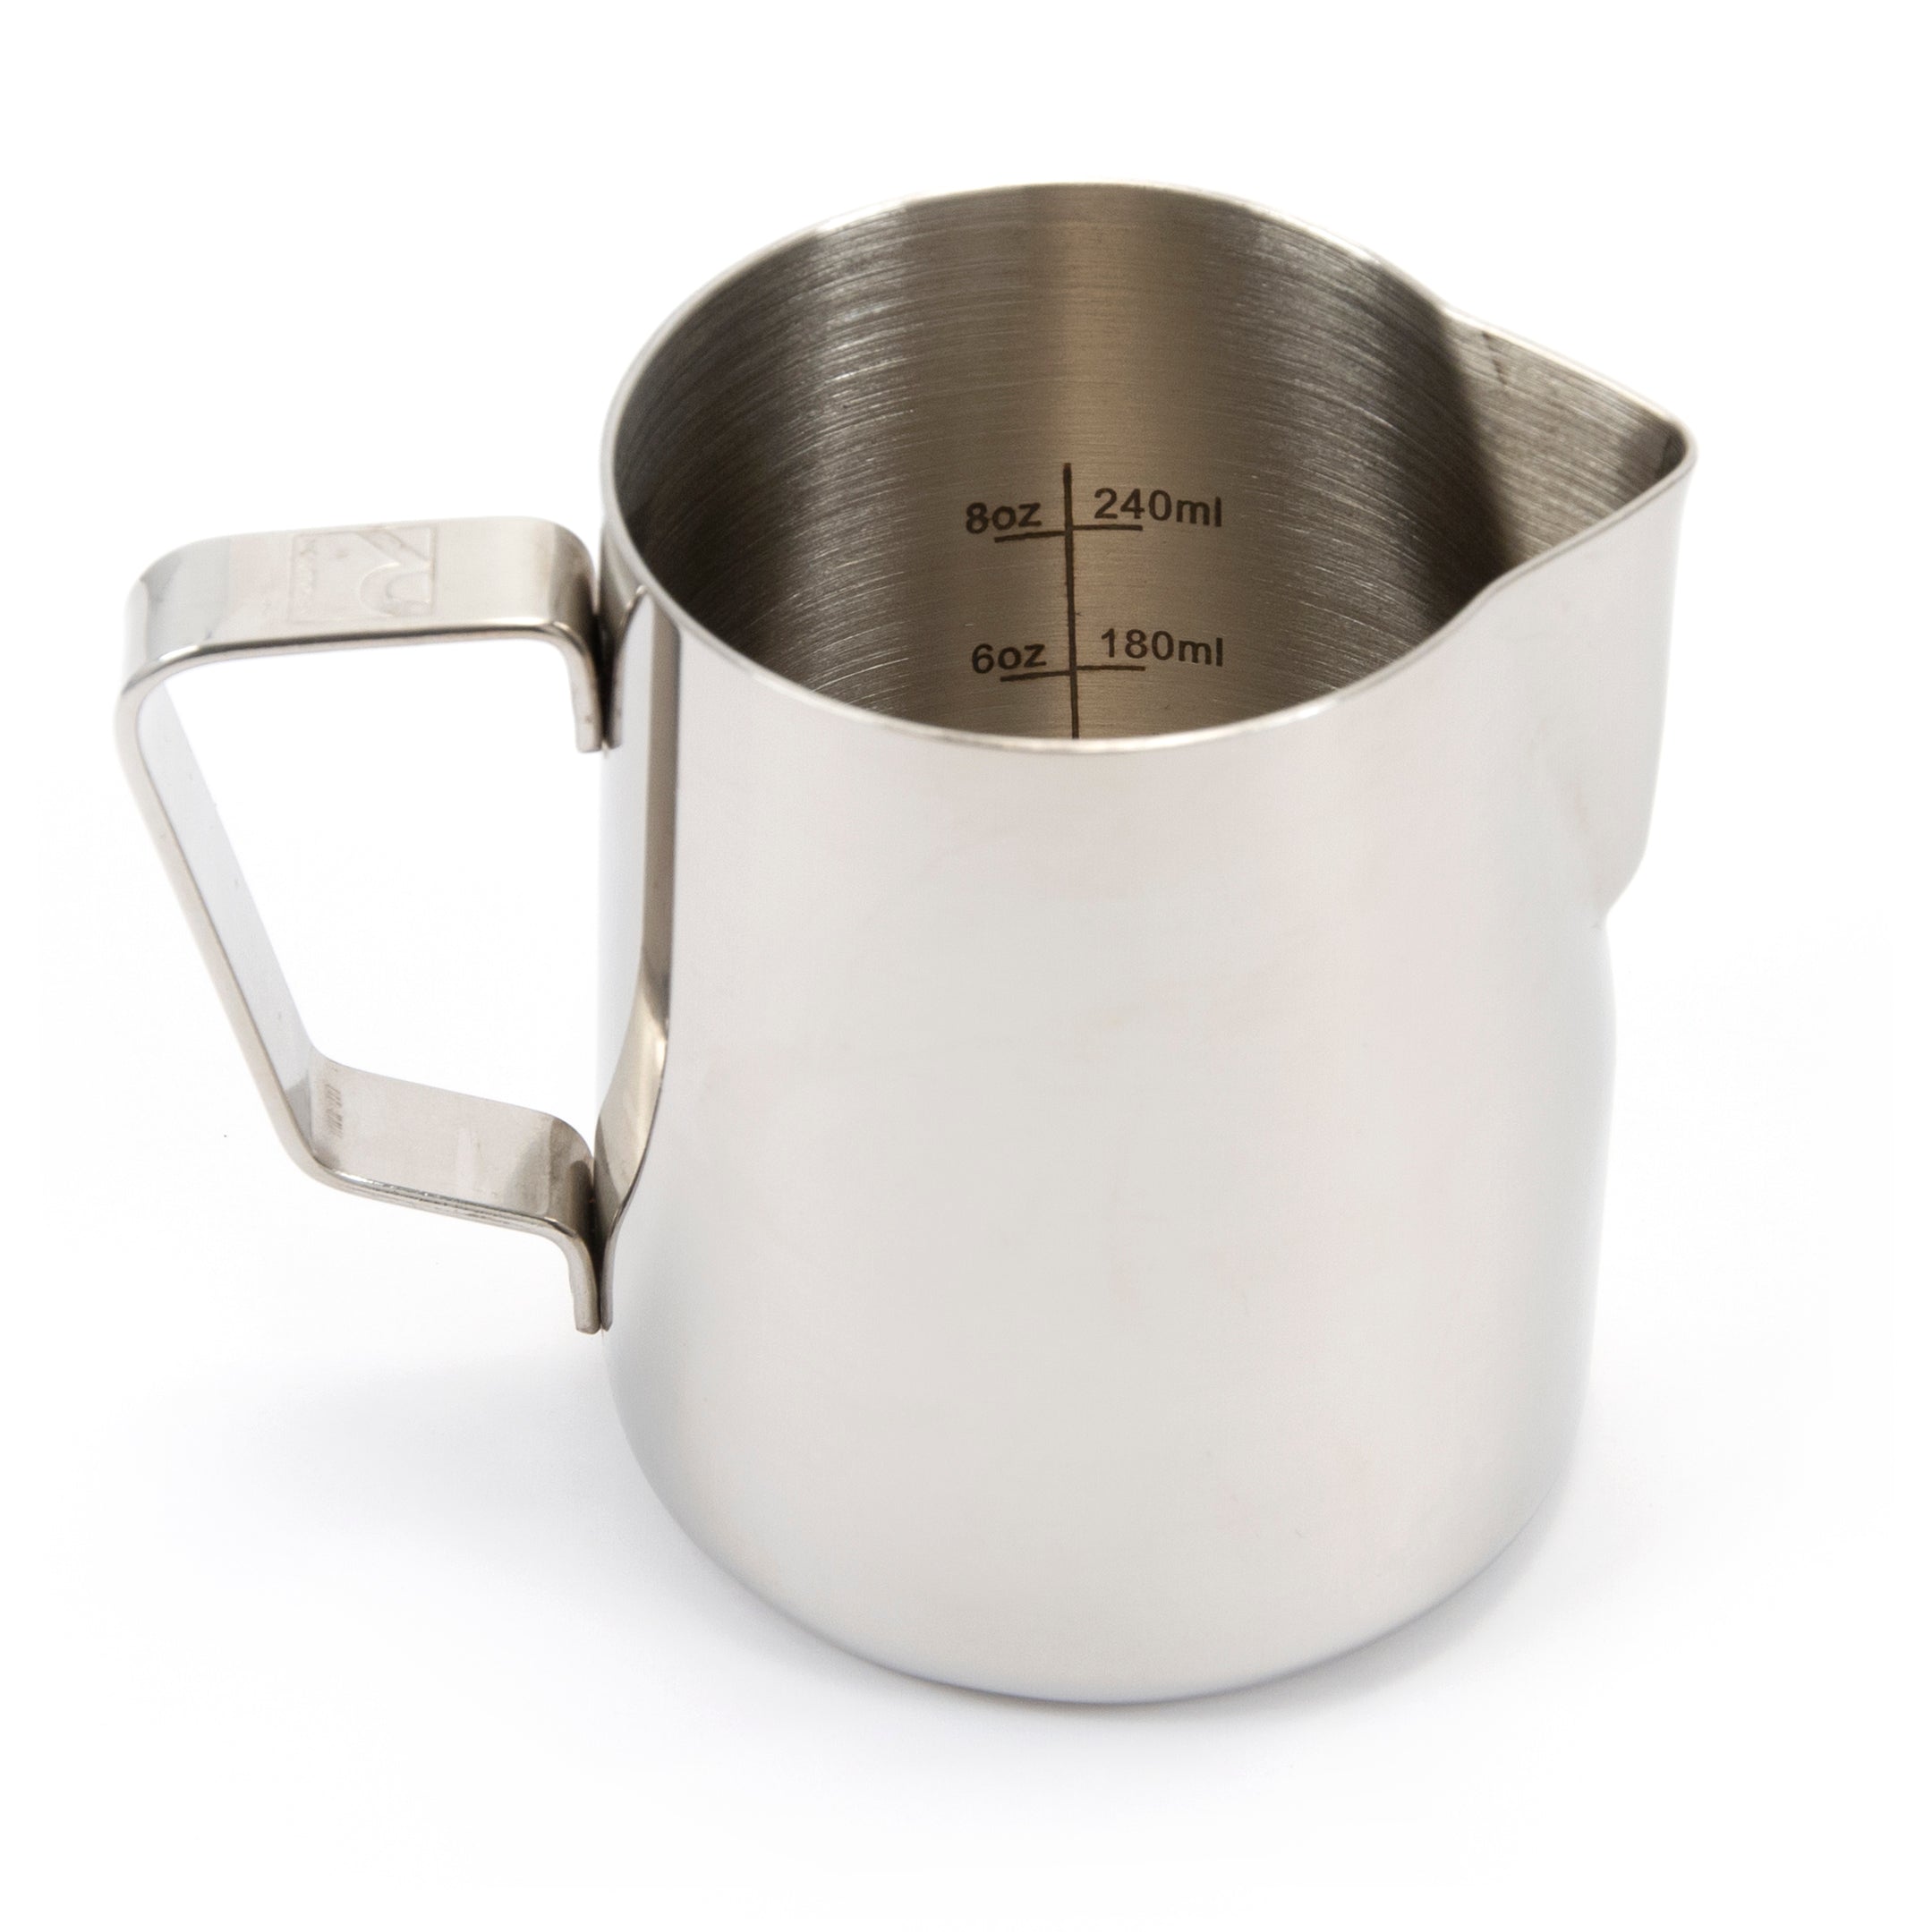 Revolution Stainless Steel Steaming Pitcher - 12 oz - Whole Latte Love